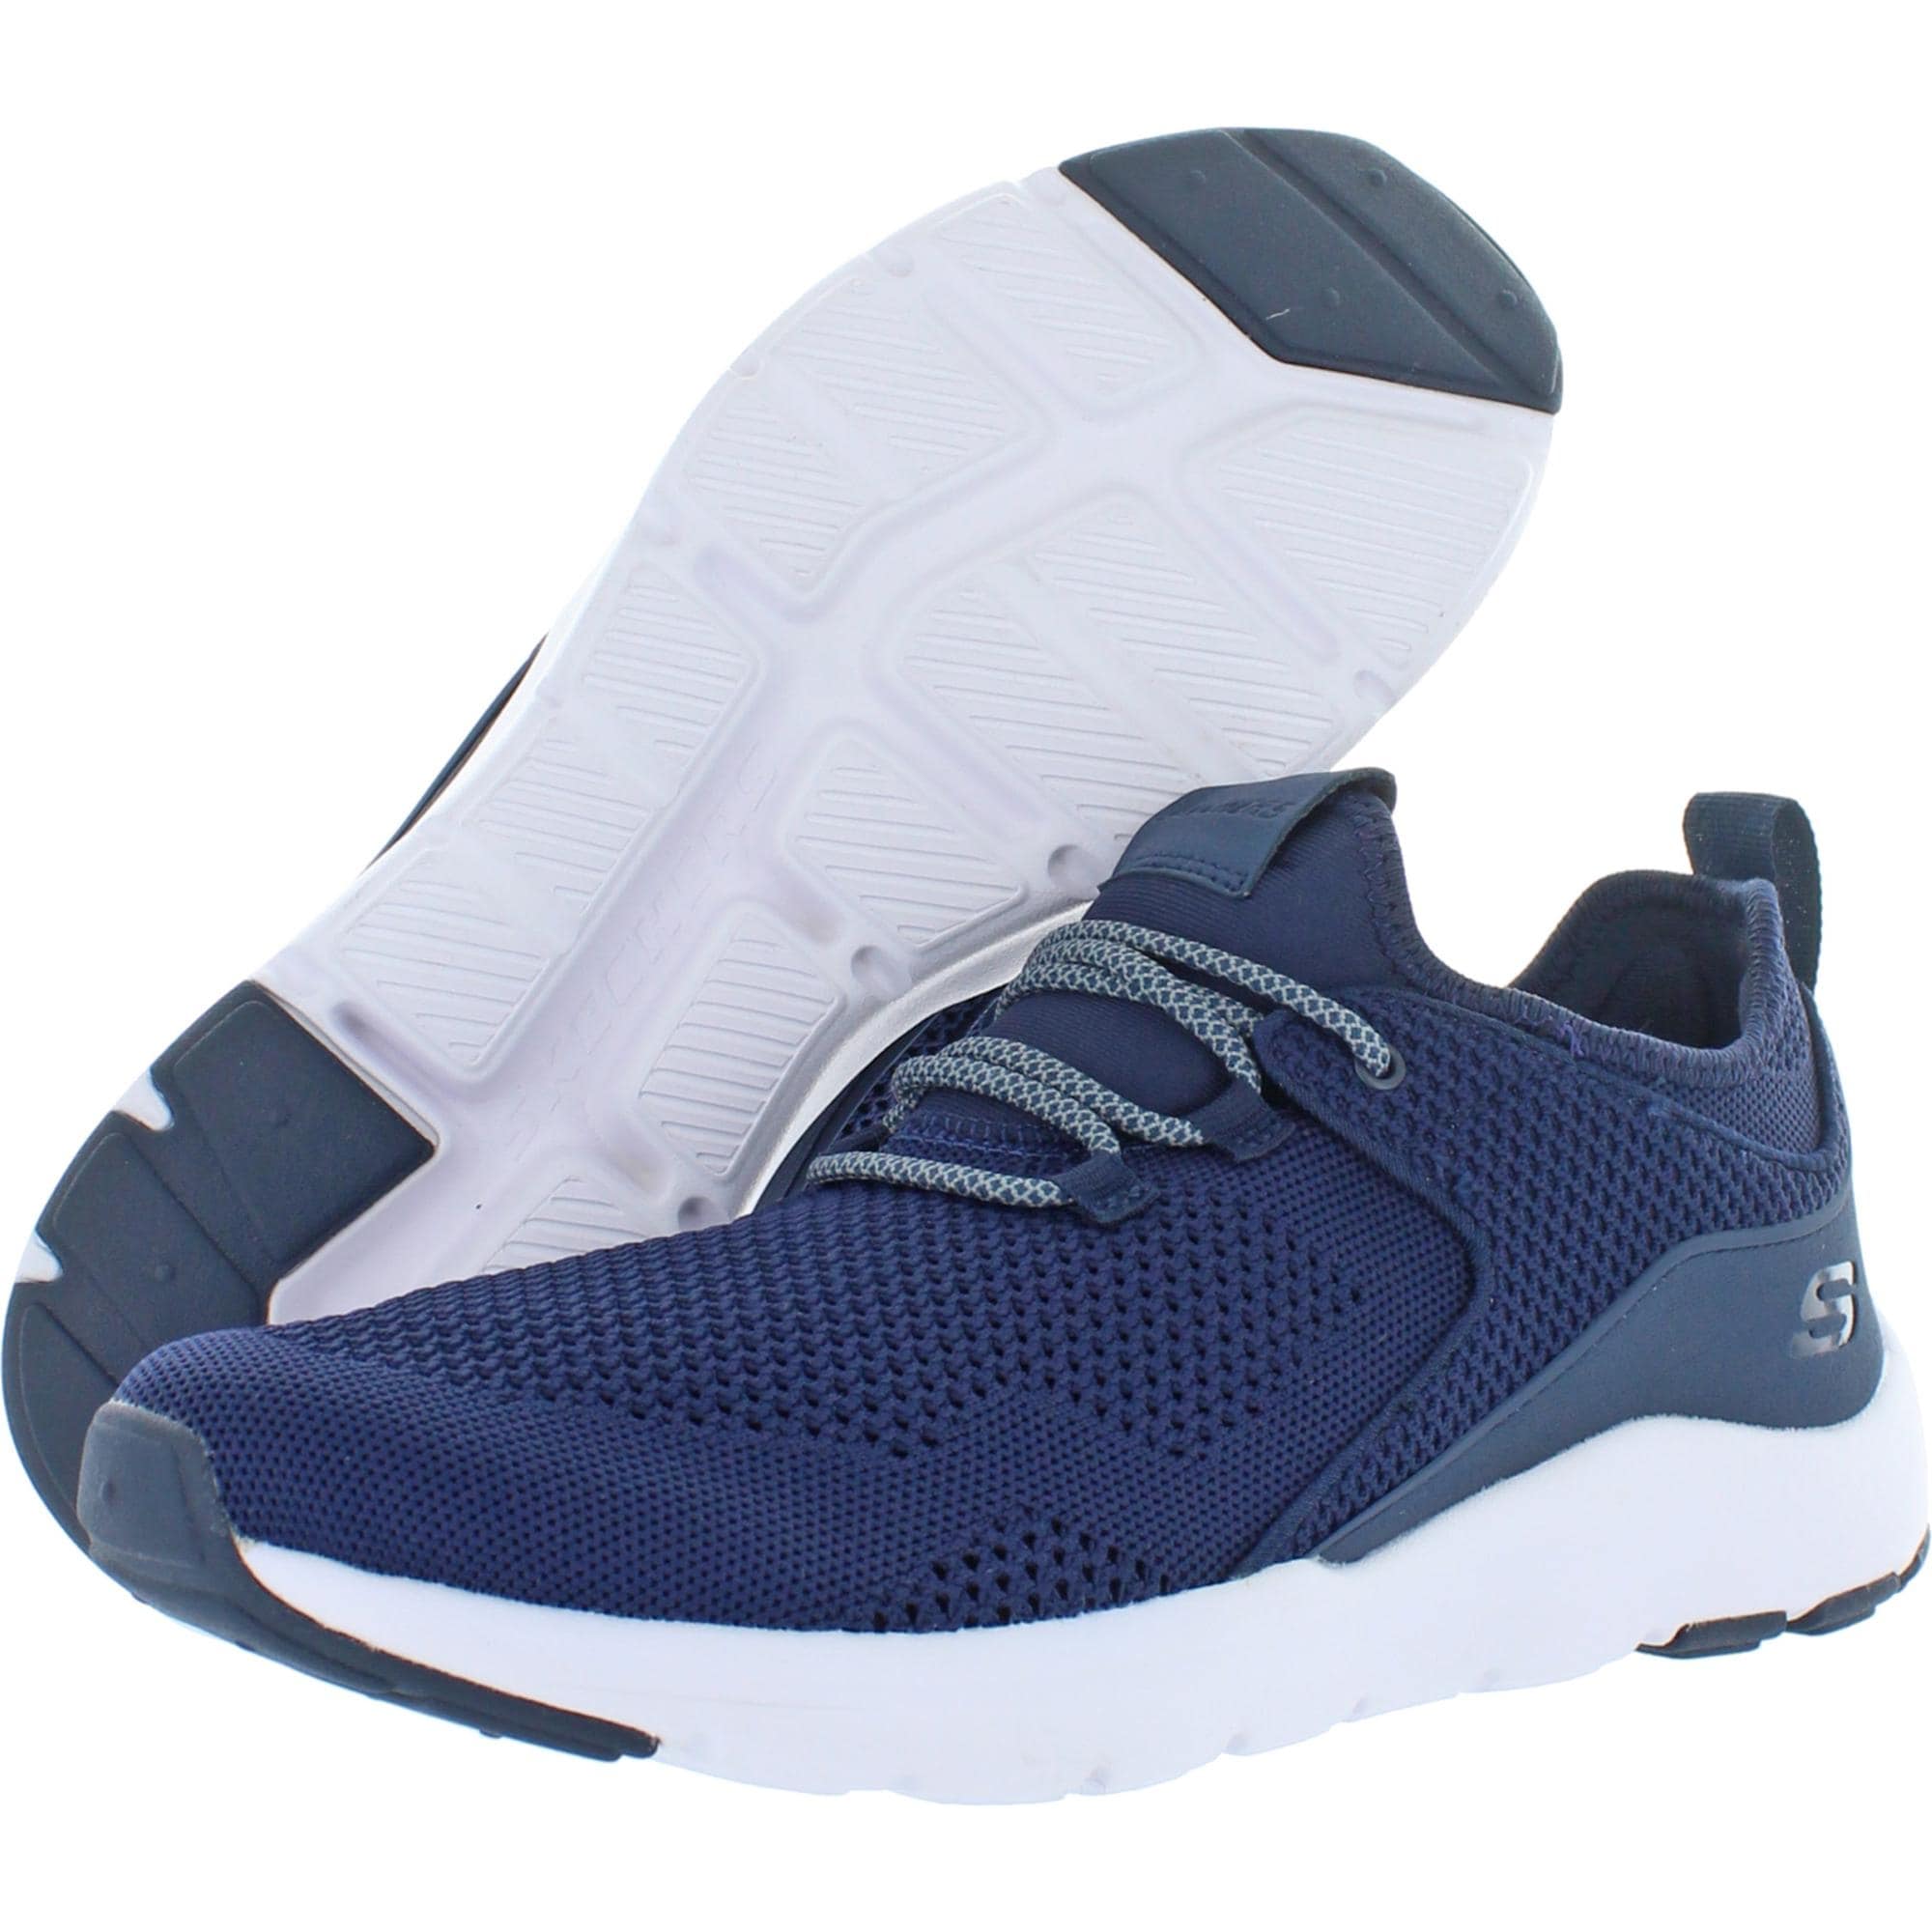 athletic shoes with memory foam